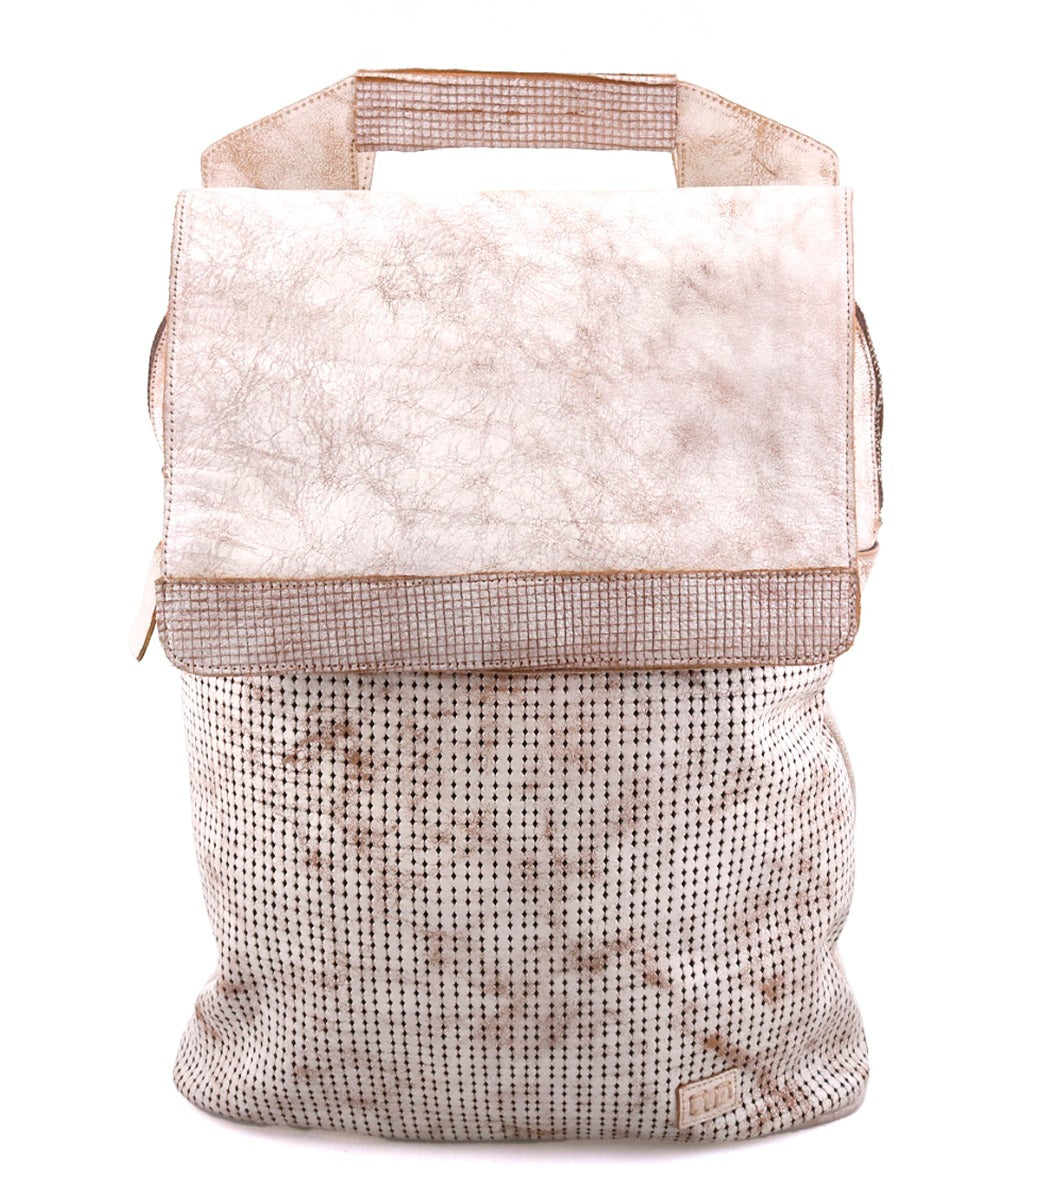 Bedstu 'Patsy' Tan Perforated Leather Backpack - Dudes Boutique